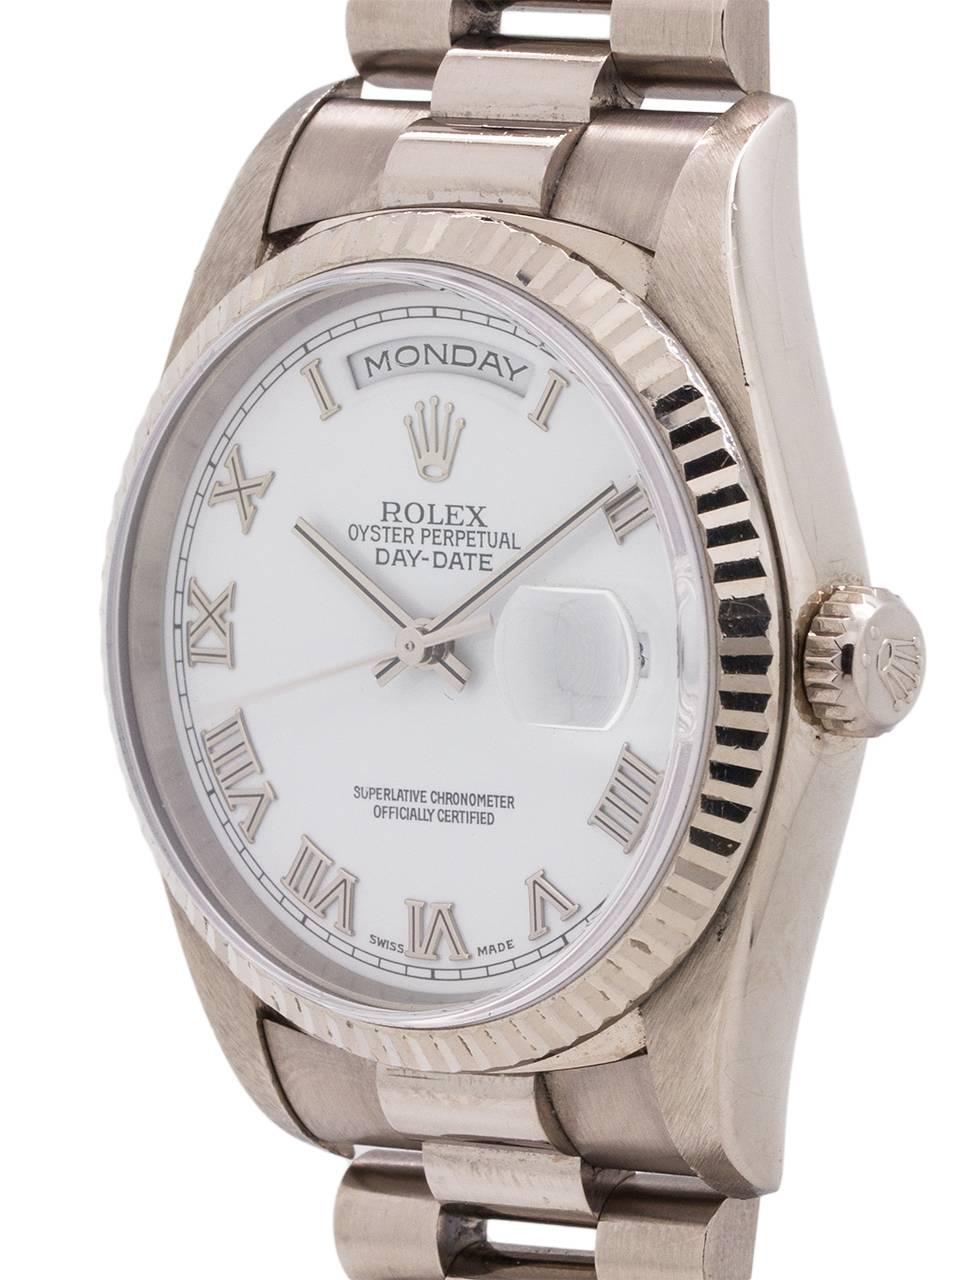 
Rolex 18K WG Day Date “double quick” President ref# 18239, A serial # circa 1998. Featuring a 36mm diameter case with fluted bezel, sapphire crystal, and beautiful original gloss white heavy Roman dial with applied silver indexes with black enamel